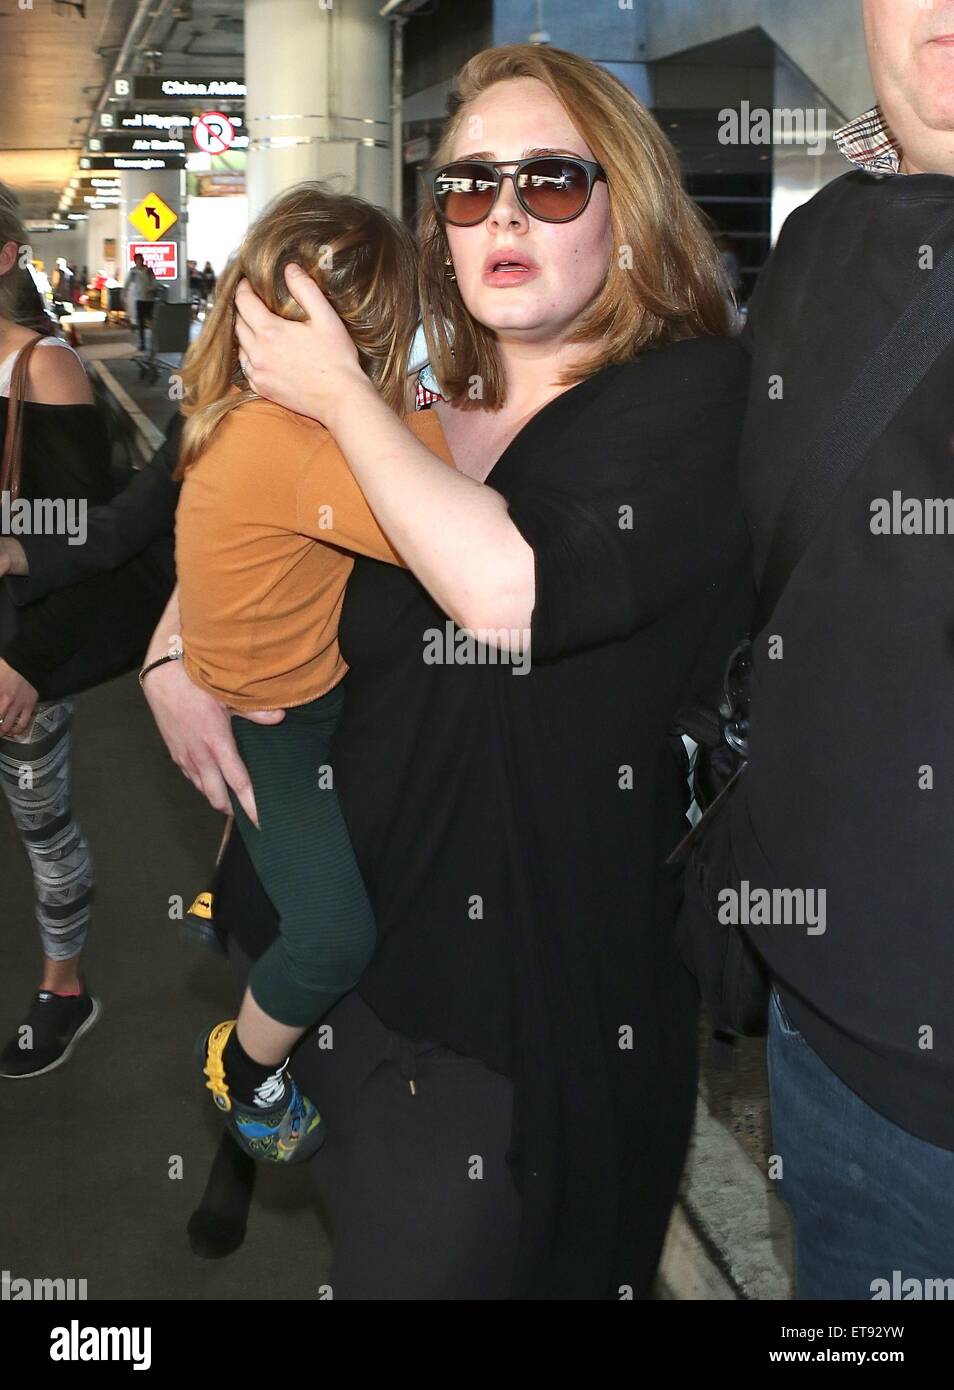 Adele arrives at Los Angeles International (LAX) airport carrying her son Angelo  Featuring: Adele Adkins, Angelo Konecki Where: Los Angeles, California, United States When: 03 Jan 2015 Credit: WENN.com Stock Photo